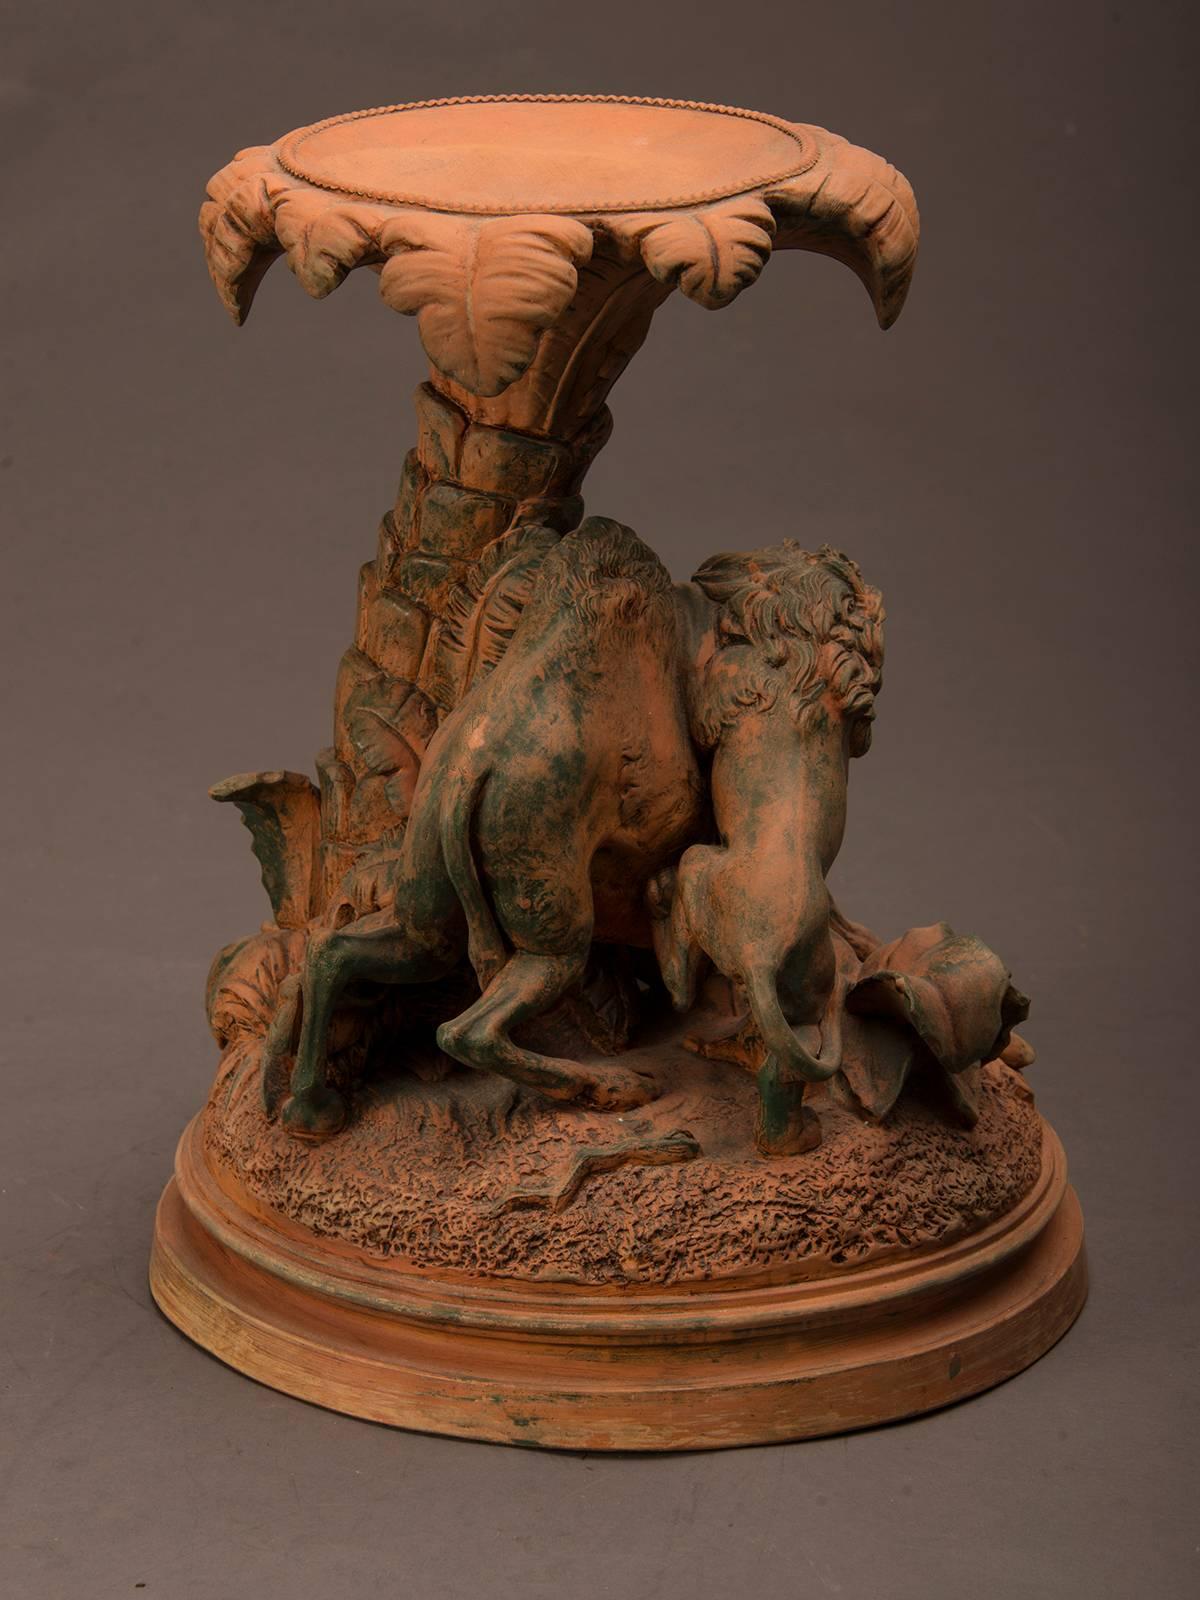 Antique French Terra Cotta Lion and Camel Sculpture France, circa 1900 In Excellent Condition For Sale In Houston, TX